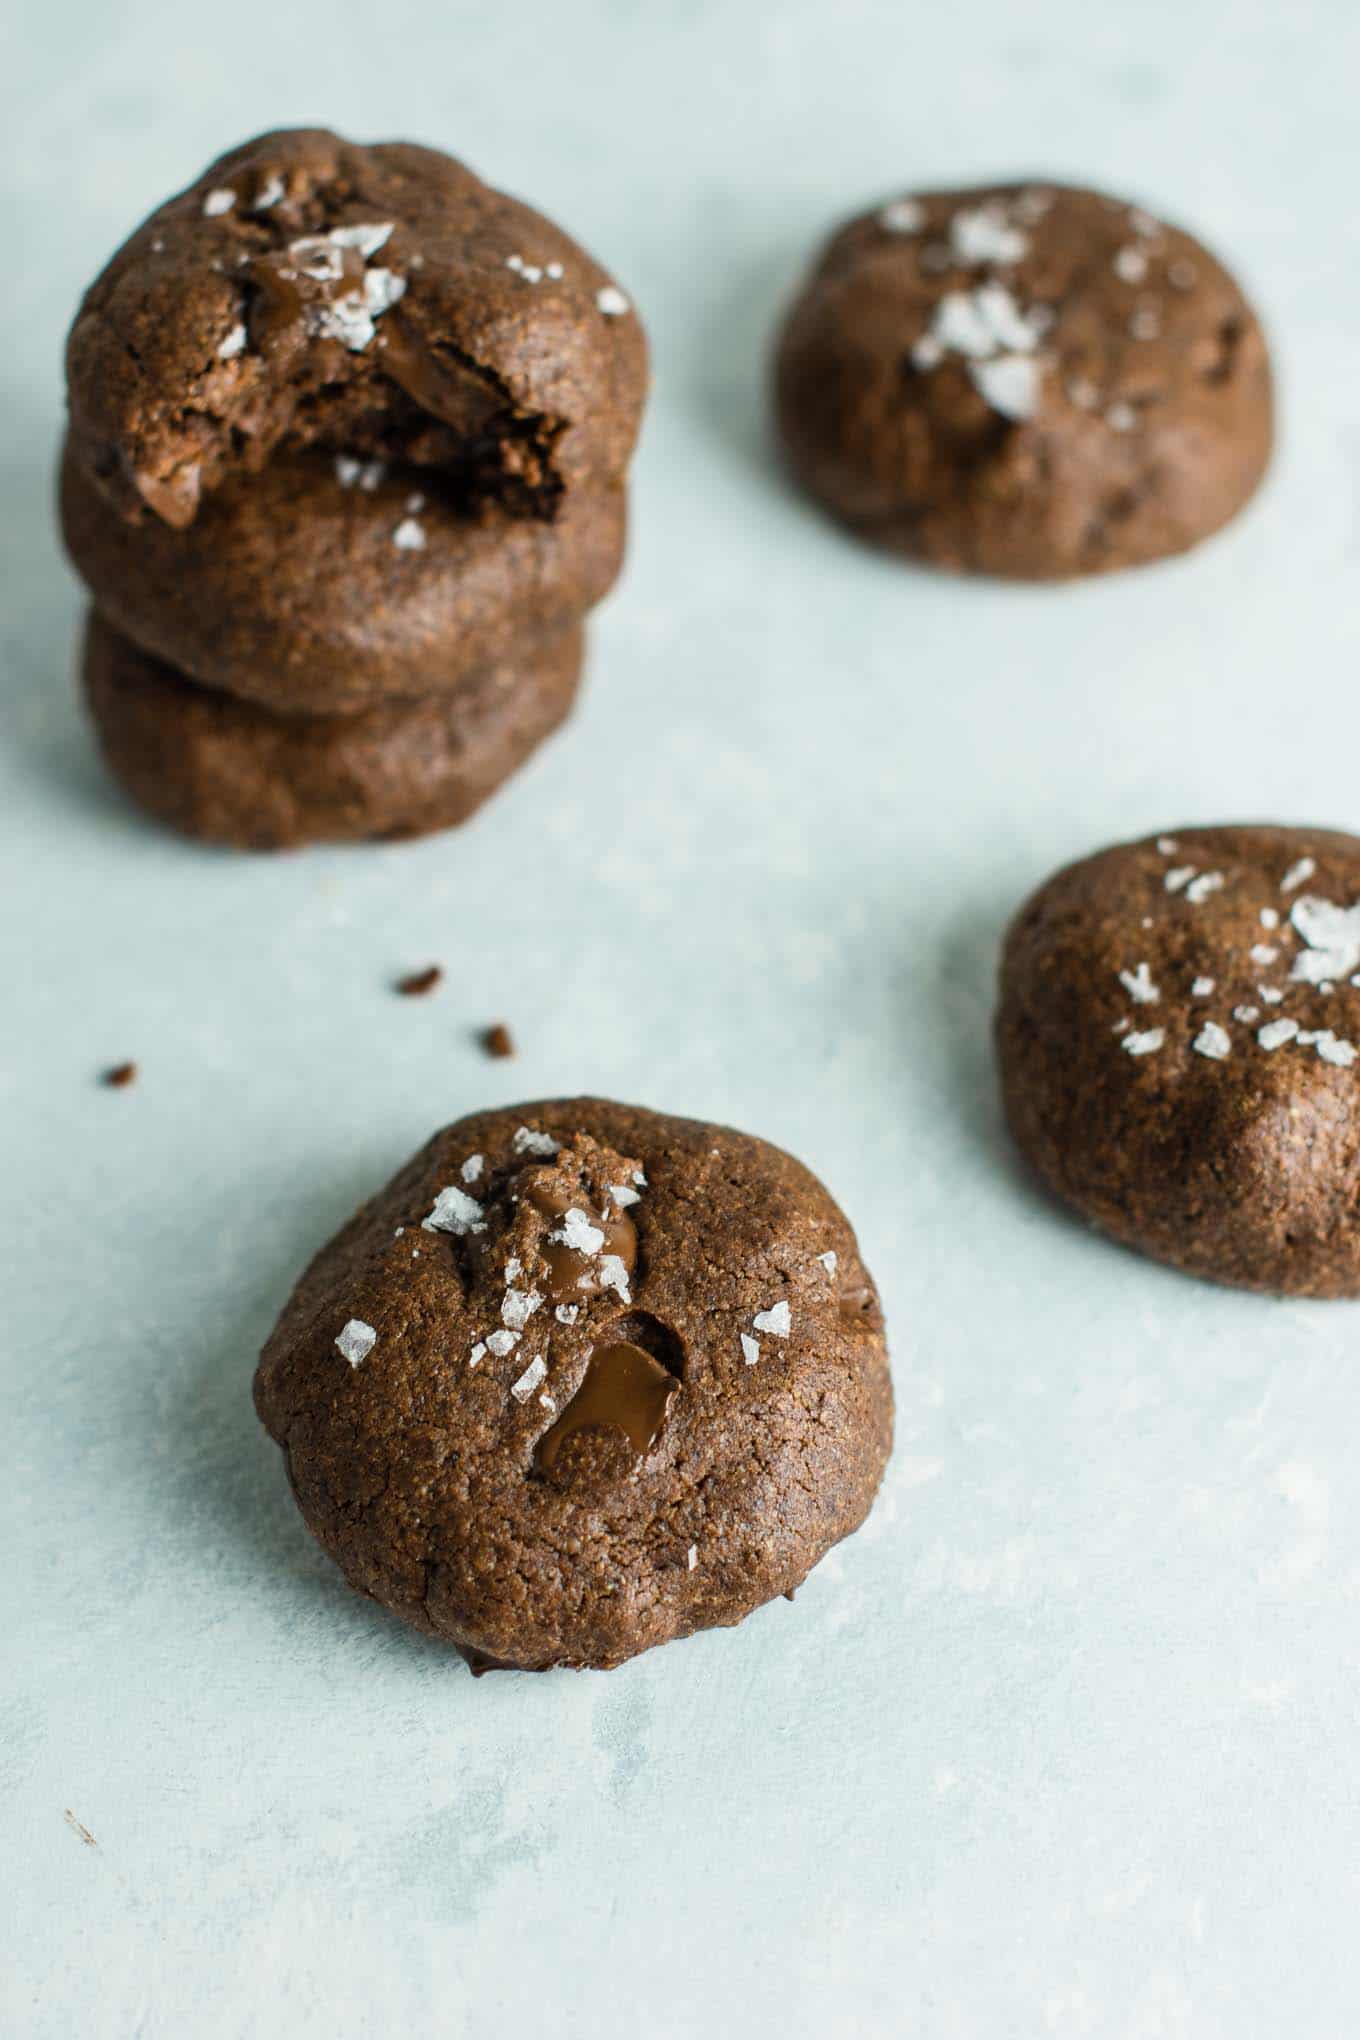 Healthy double chocolate chip cookies with sea salt. So decadent and delicious and made healthier with coconut oil! #doublechocolatechipcookies #healthycookies #dairyfree #dessert #healthy